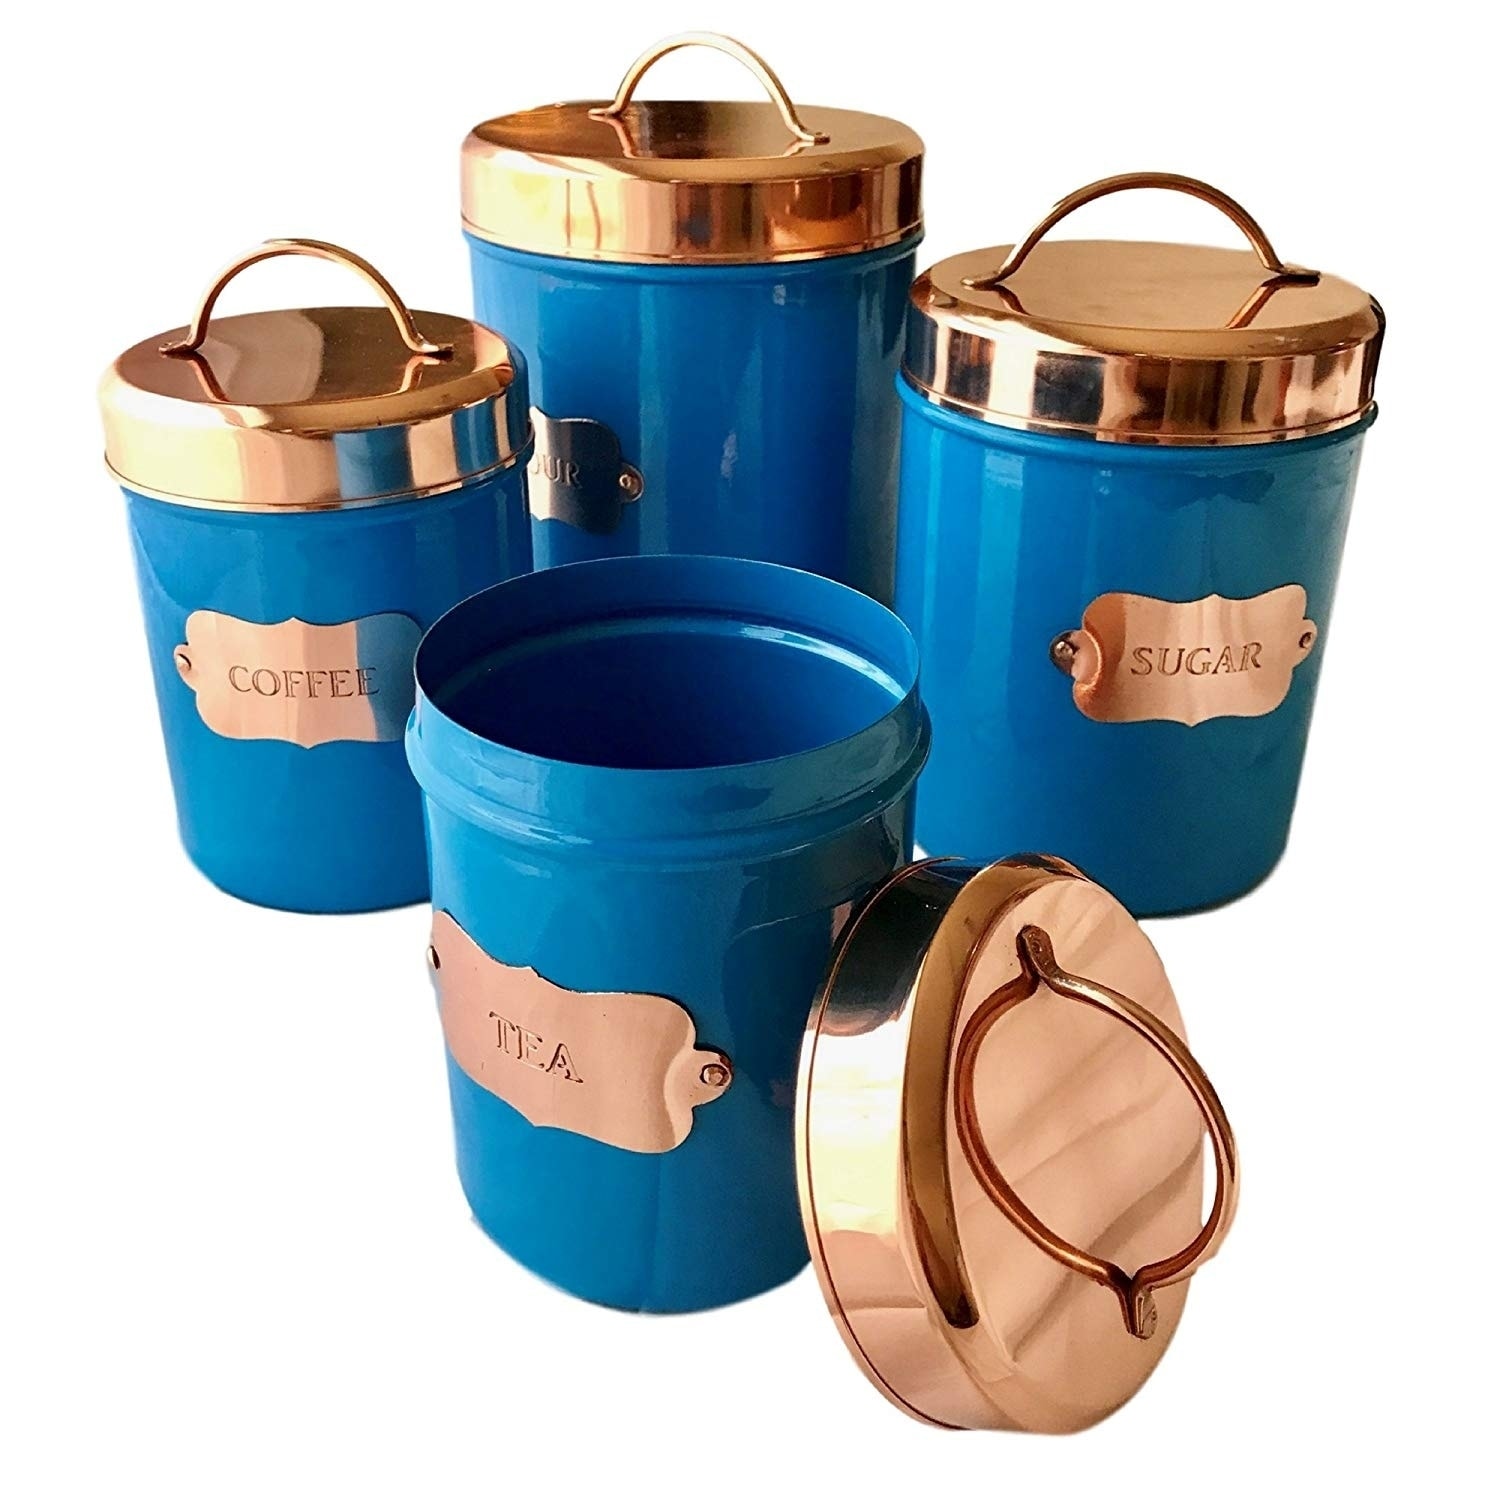 Copper Kitchen Food Canister Set of 4 by Kauri Design - Bed Bath & Beyond -  20229173